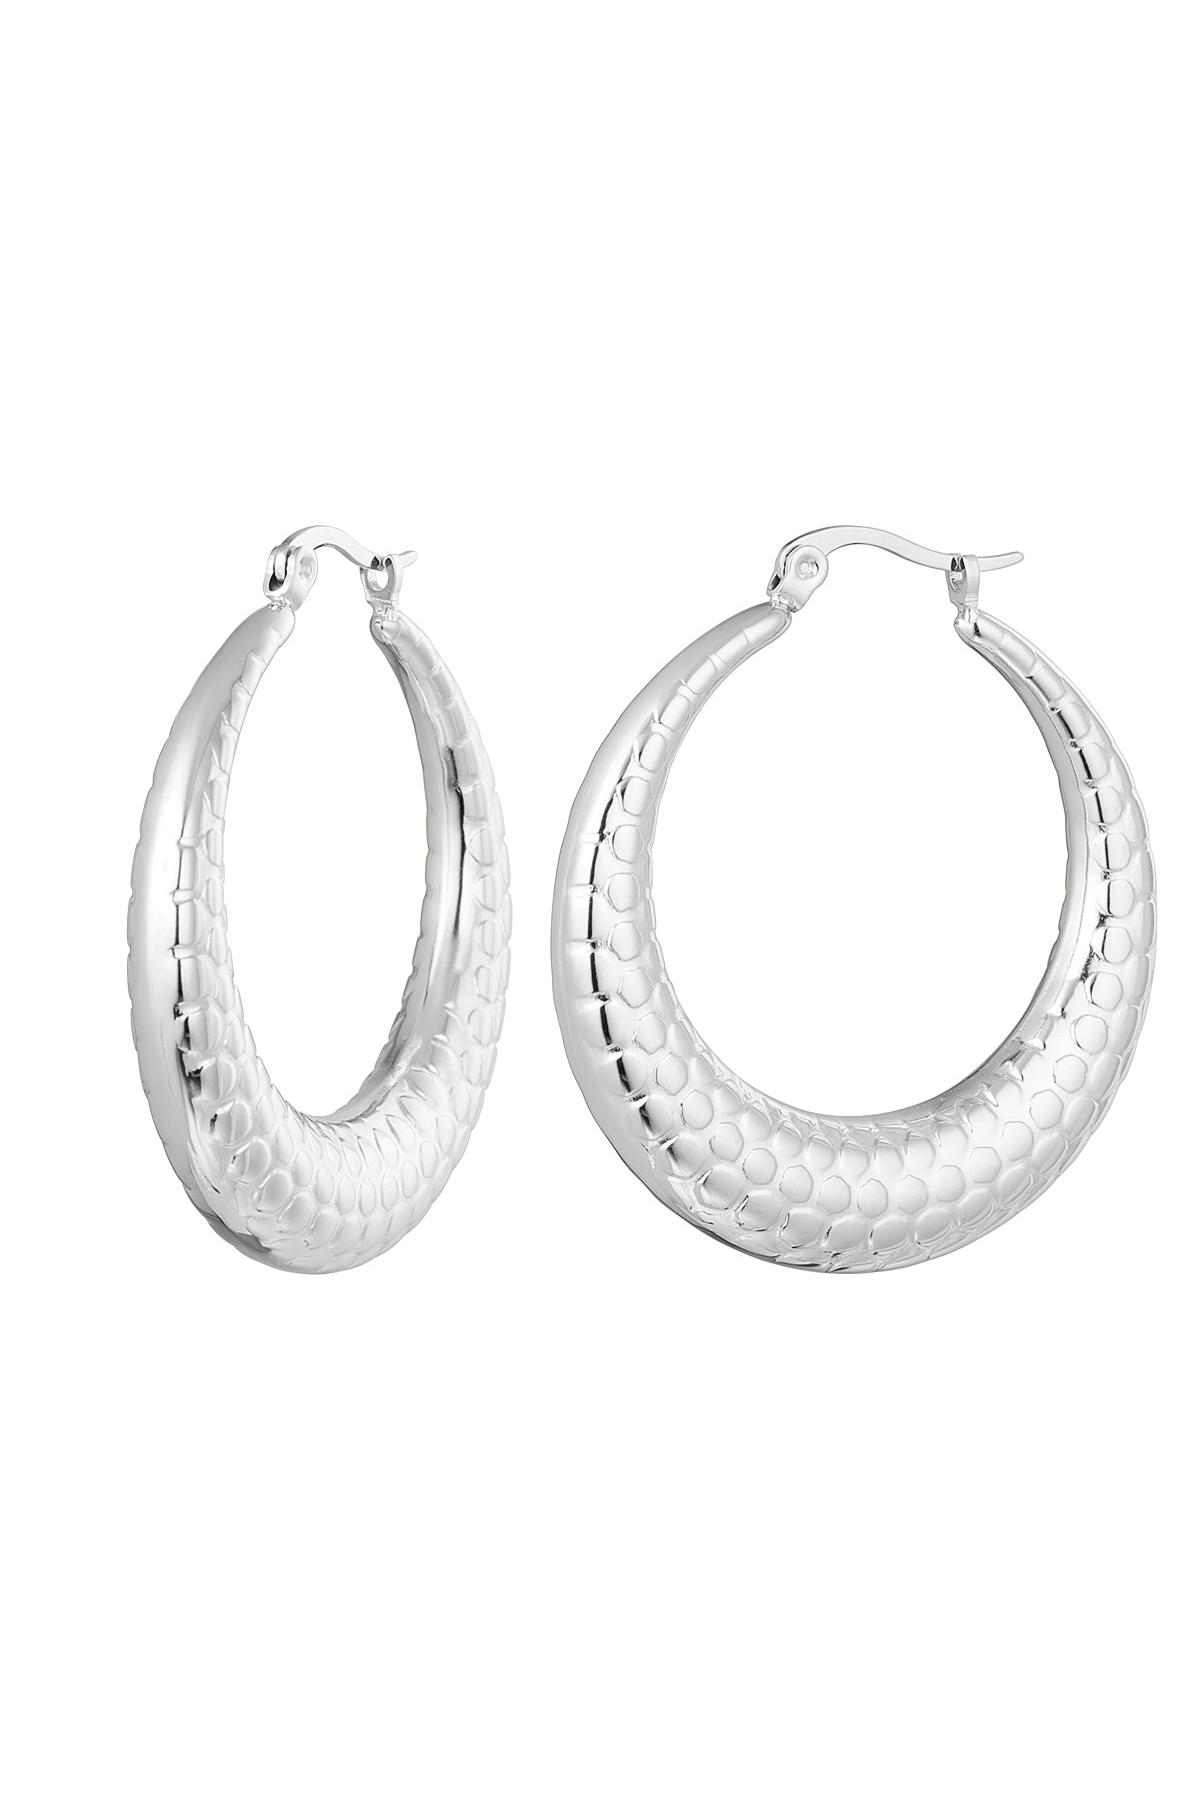 Earrings bubble print large Silver Stainless Steel 